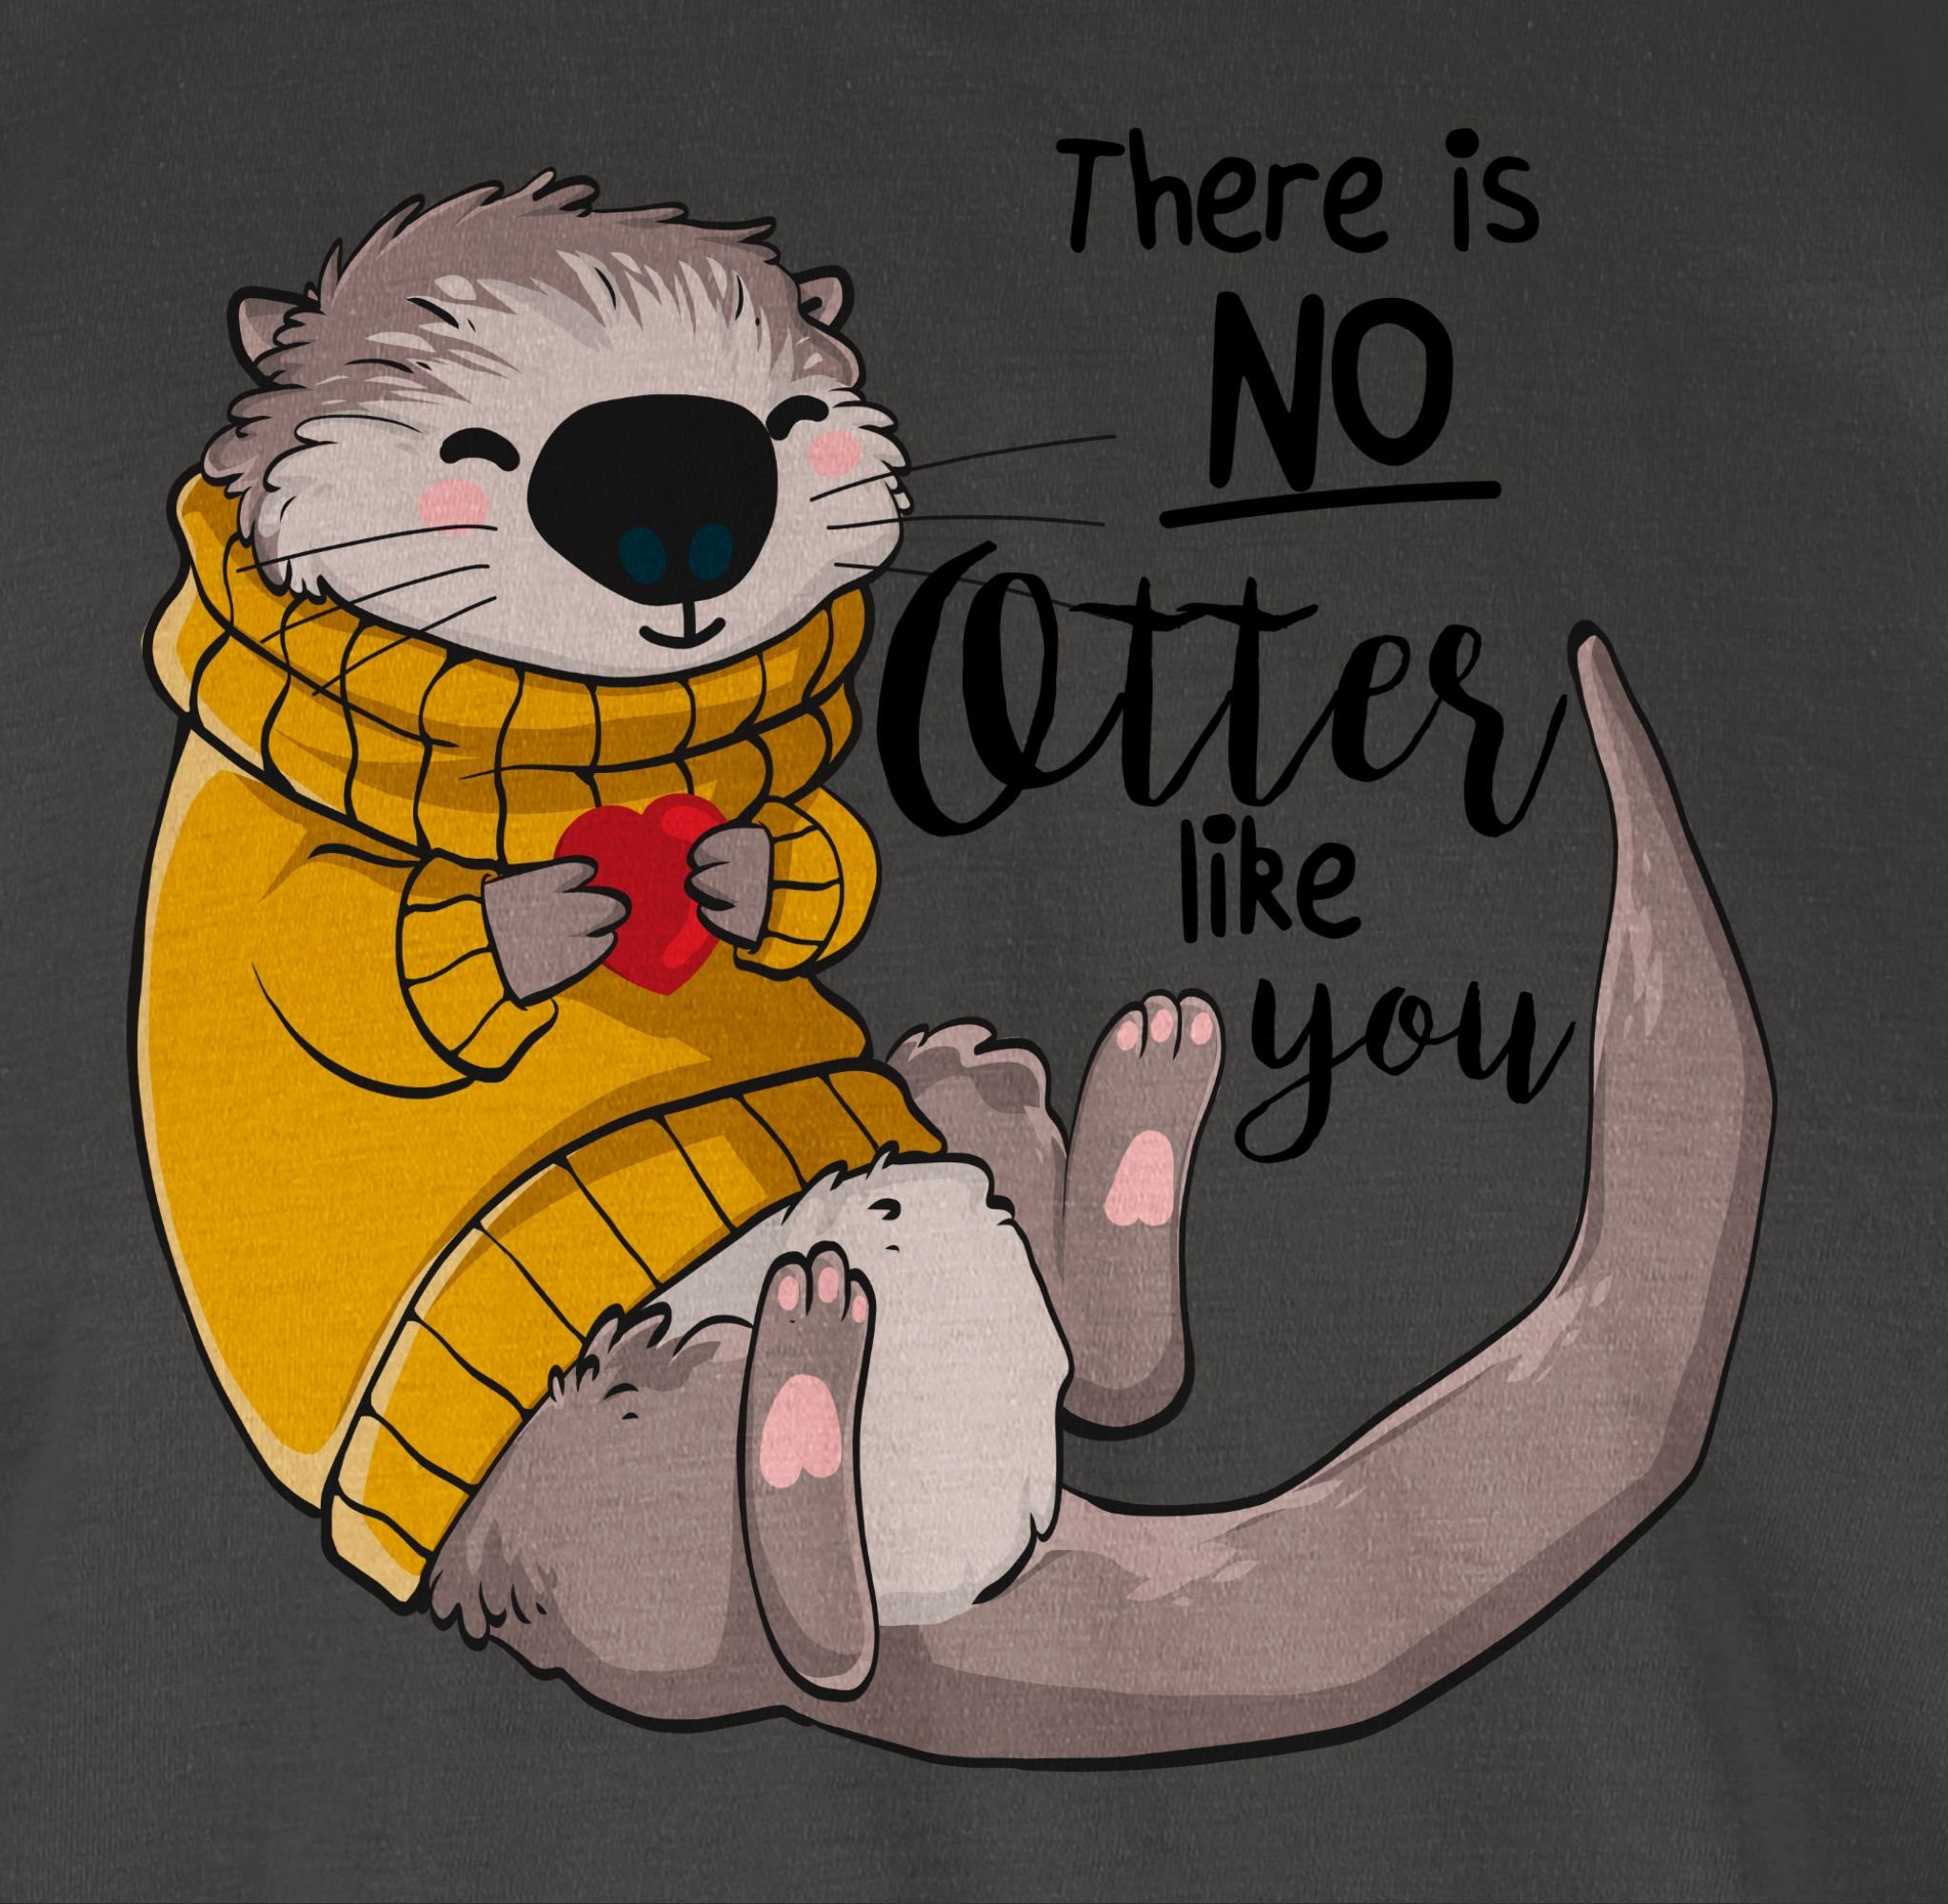 Shirtracer T-Shirt like Statement There 1 is Otter no Dunkelgrau Sprüche you